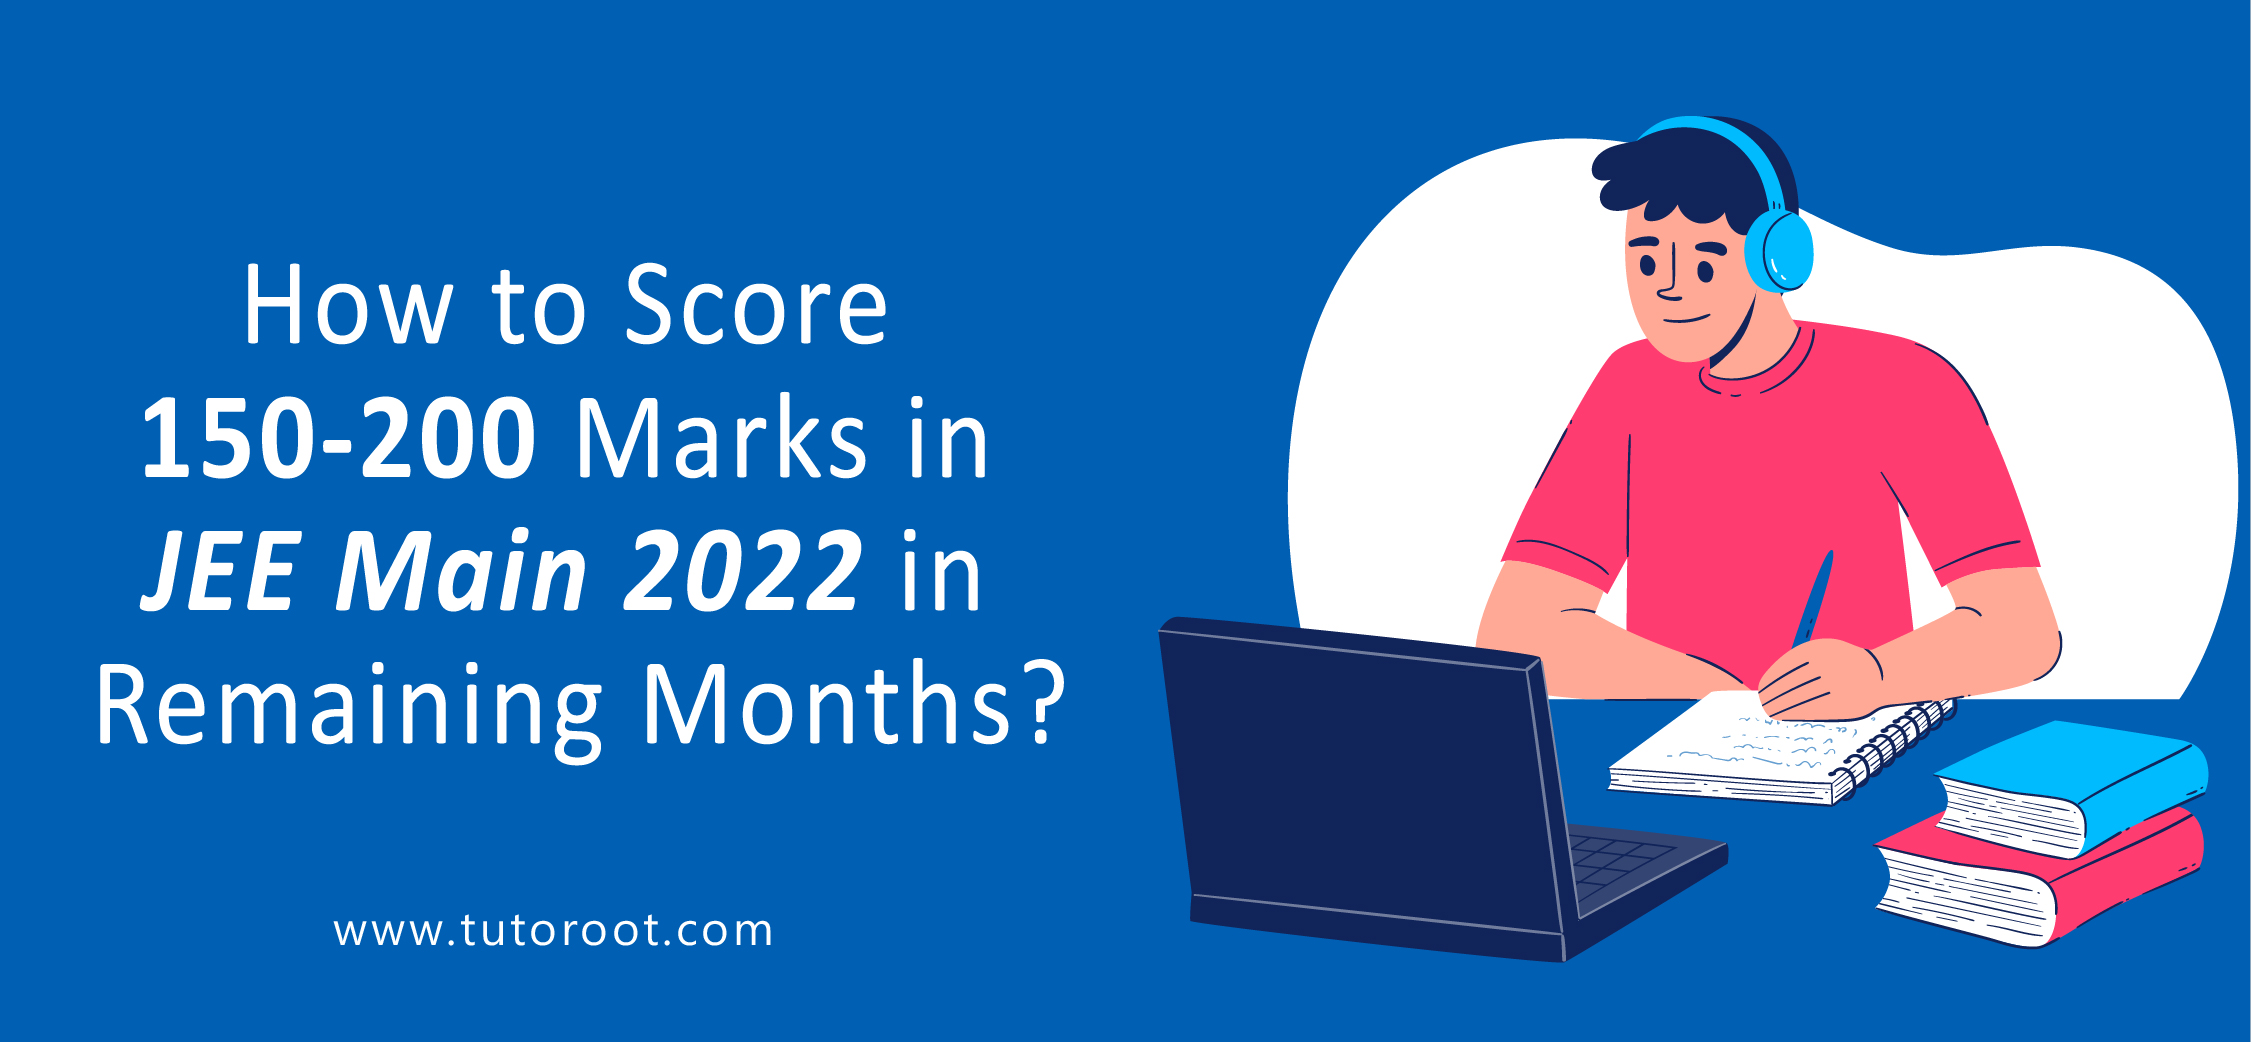 How_to_Score_150_200_Marks_in_JEE_Main_2022_in_Remaining_Months